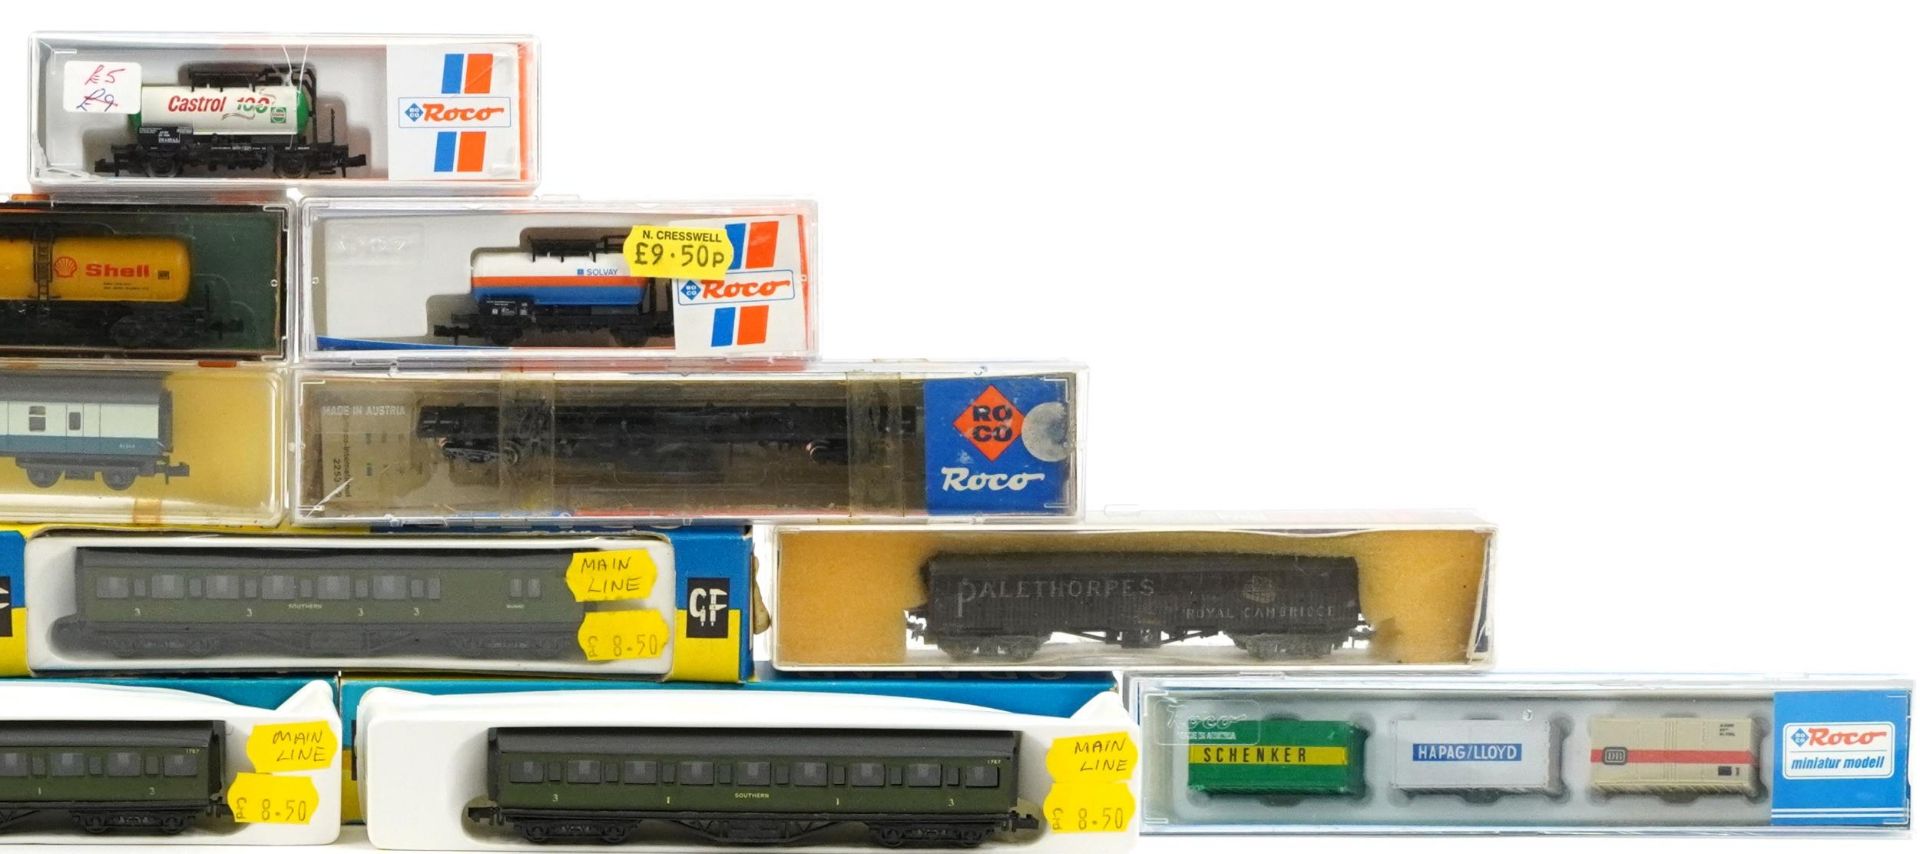 Twelve N gauge model railway carriages, tankers and wagons with boxes and cases including Graham - Bild 3 aus 4